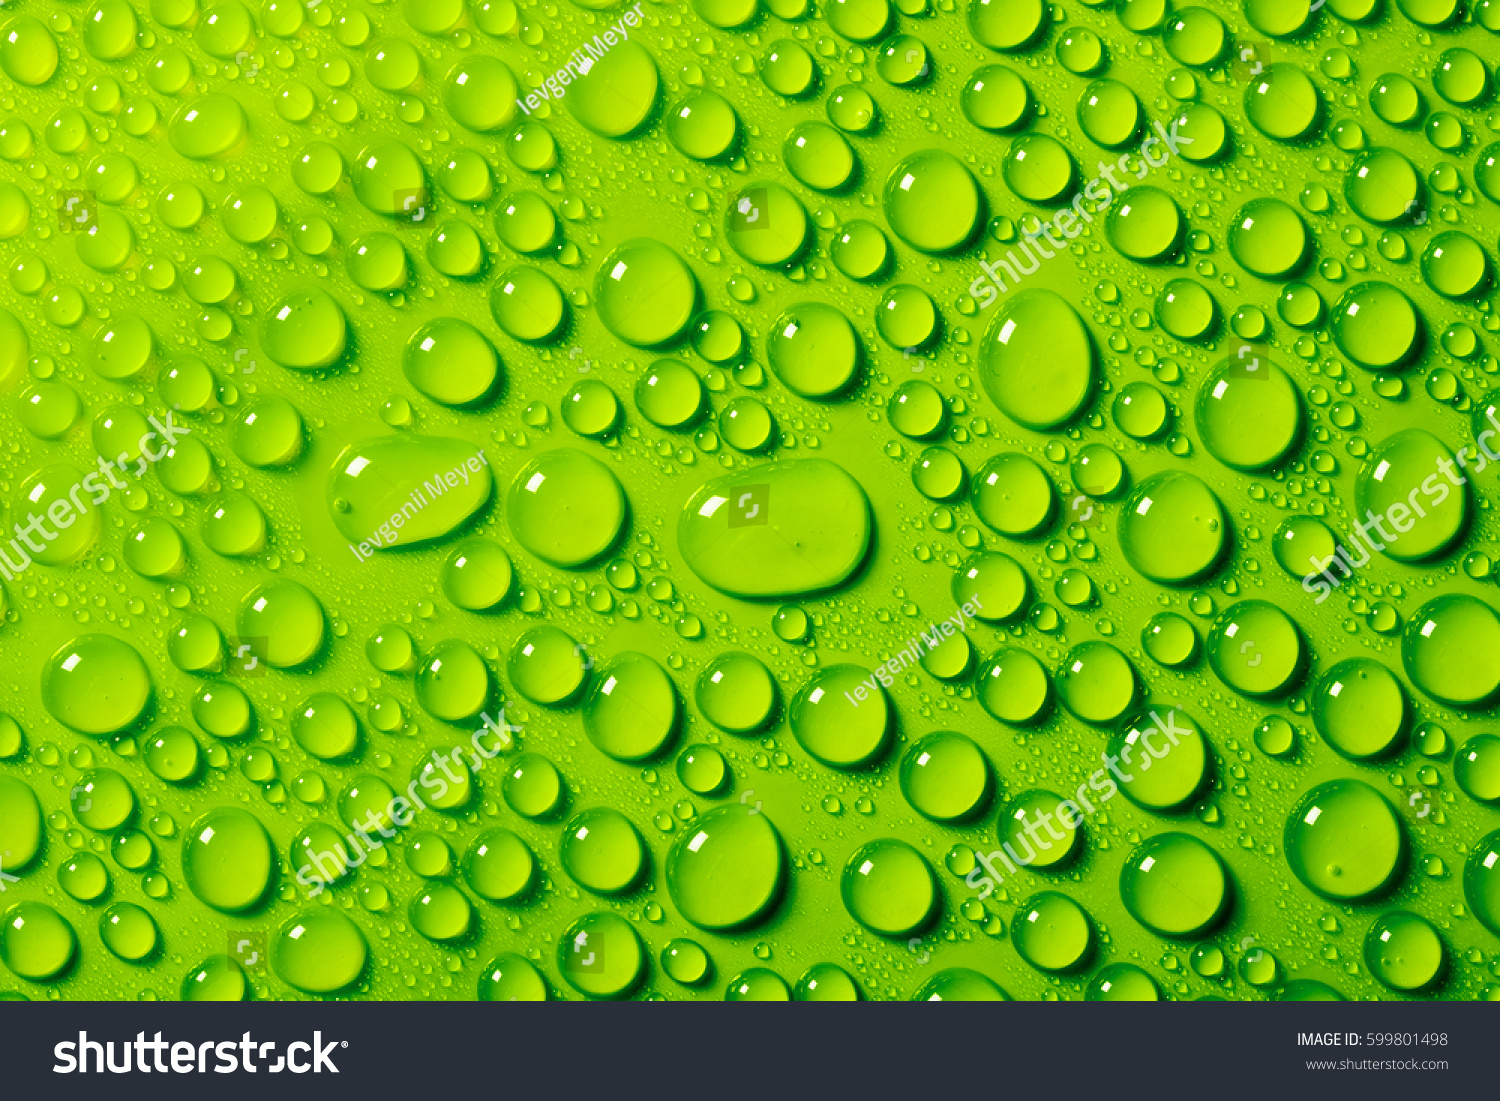 Water Drops On Green Background Stock Photo 599801498 - Shutterstock